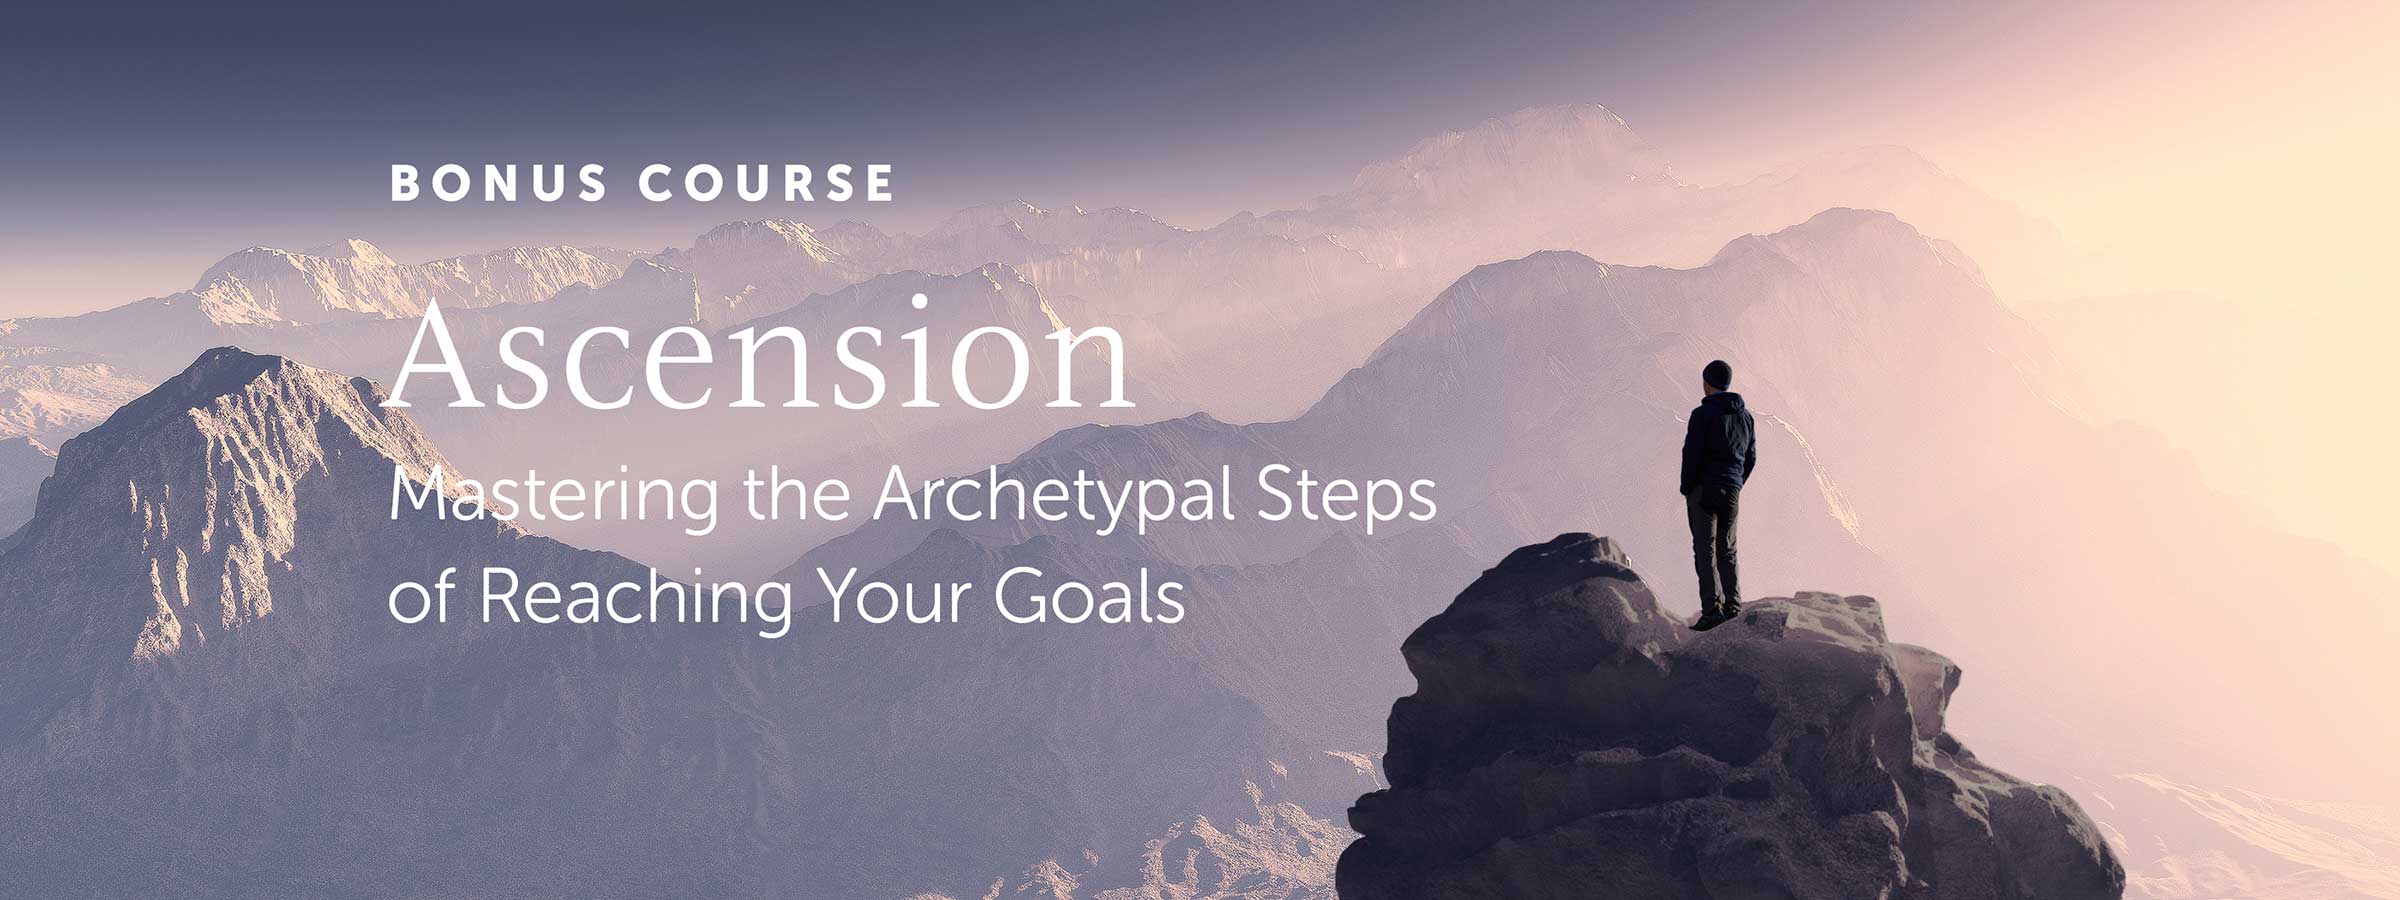 Bonus Course: Ascension – Mastering the Archetypal Steps of Reaching Your Goals